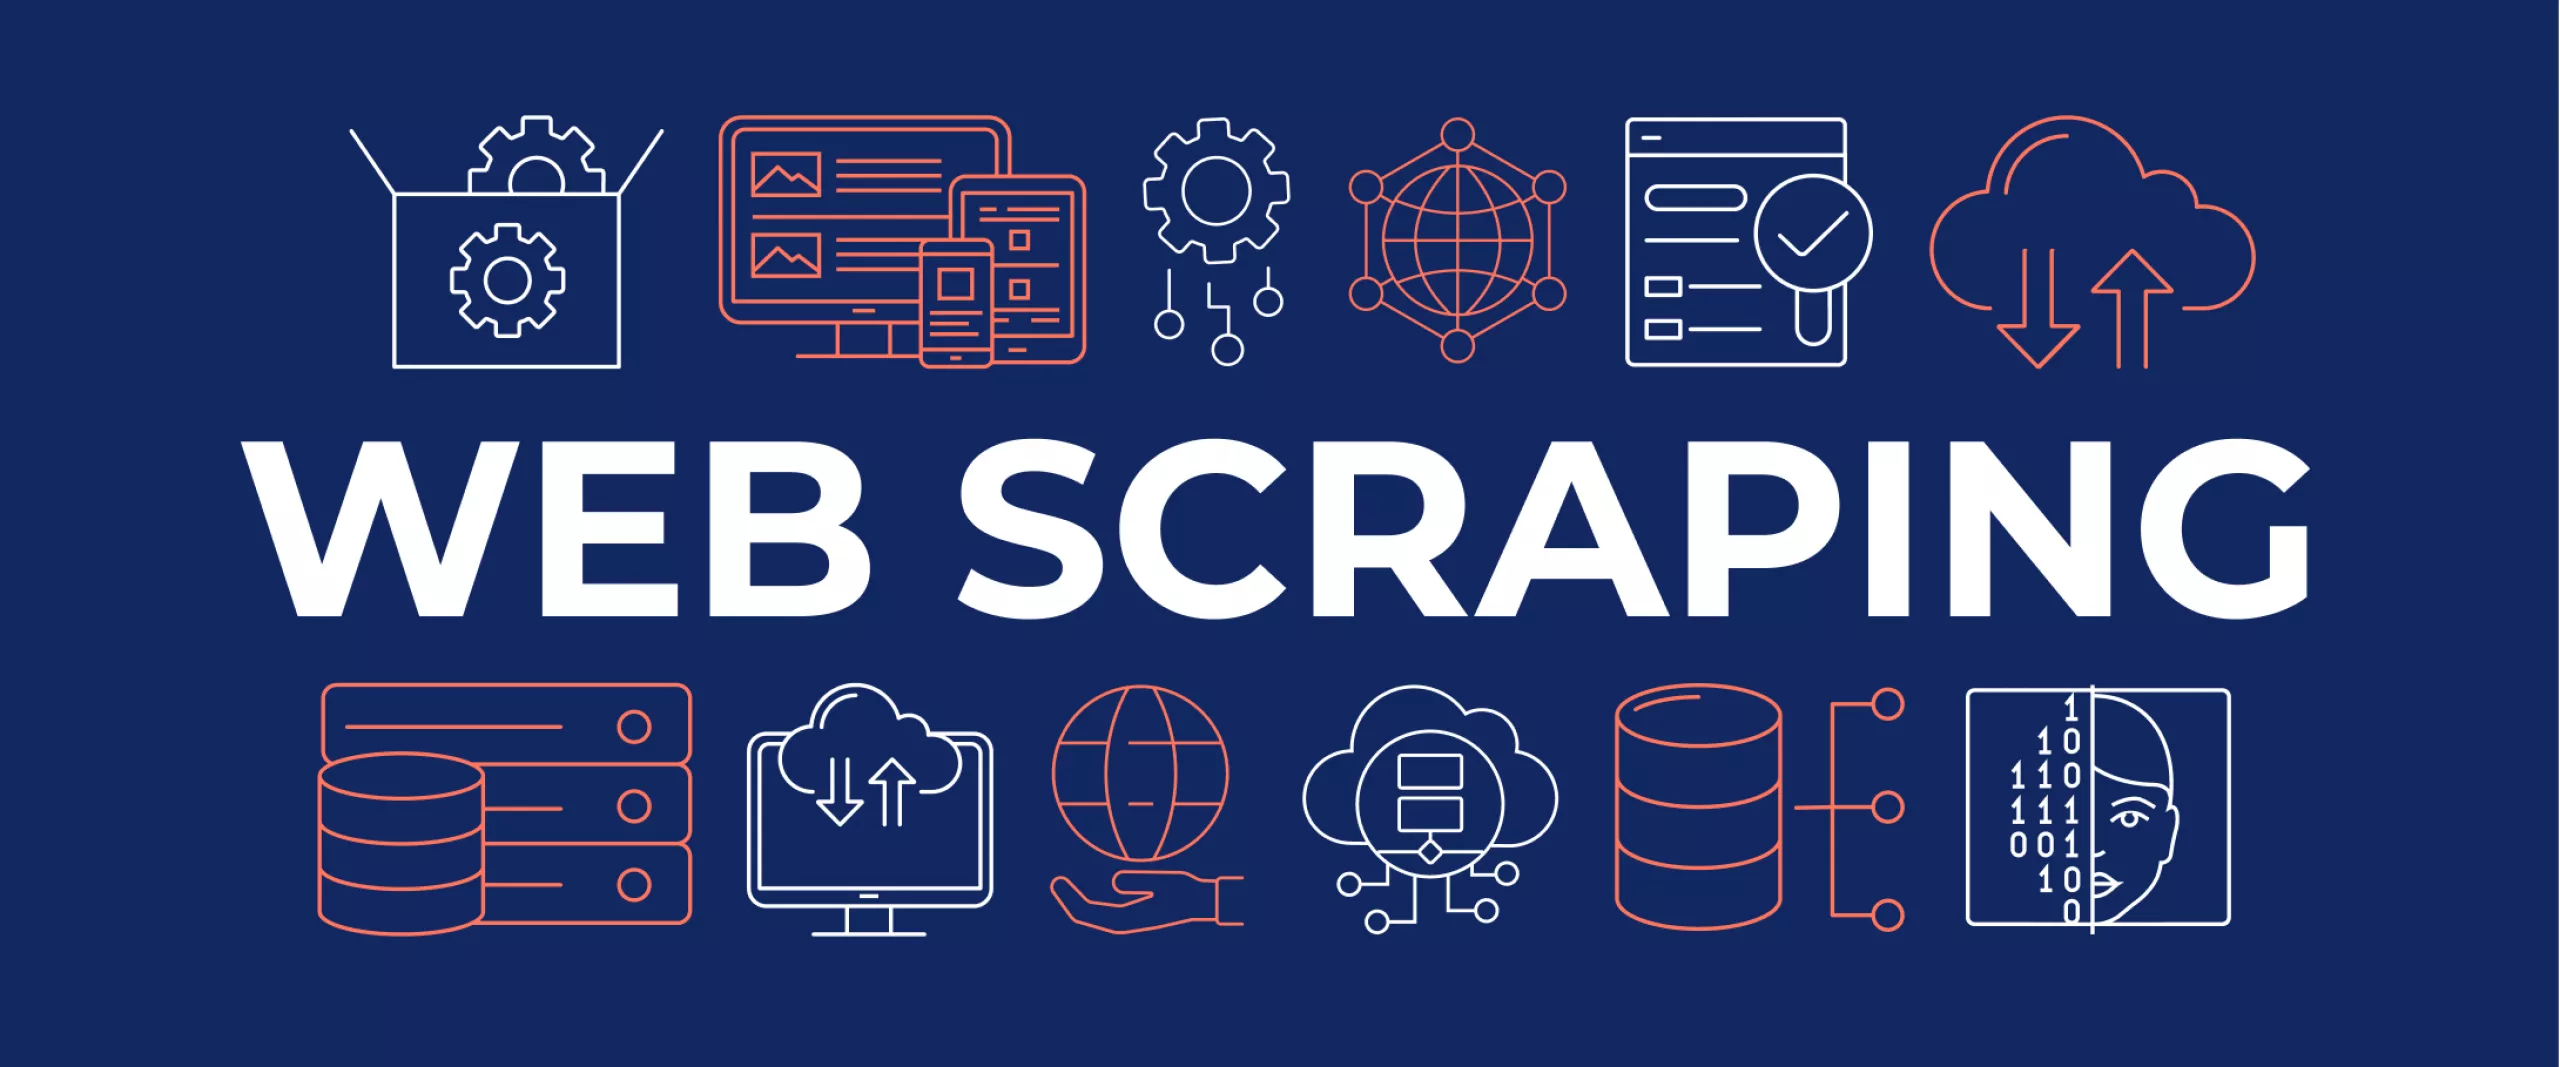 Web Scraping: What It Is and How to Use It | Scrape-It.Cloud